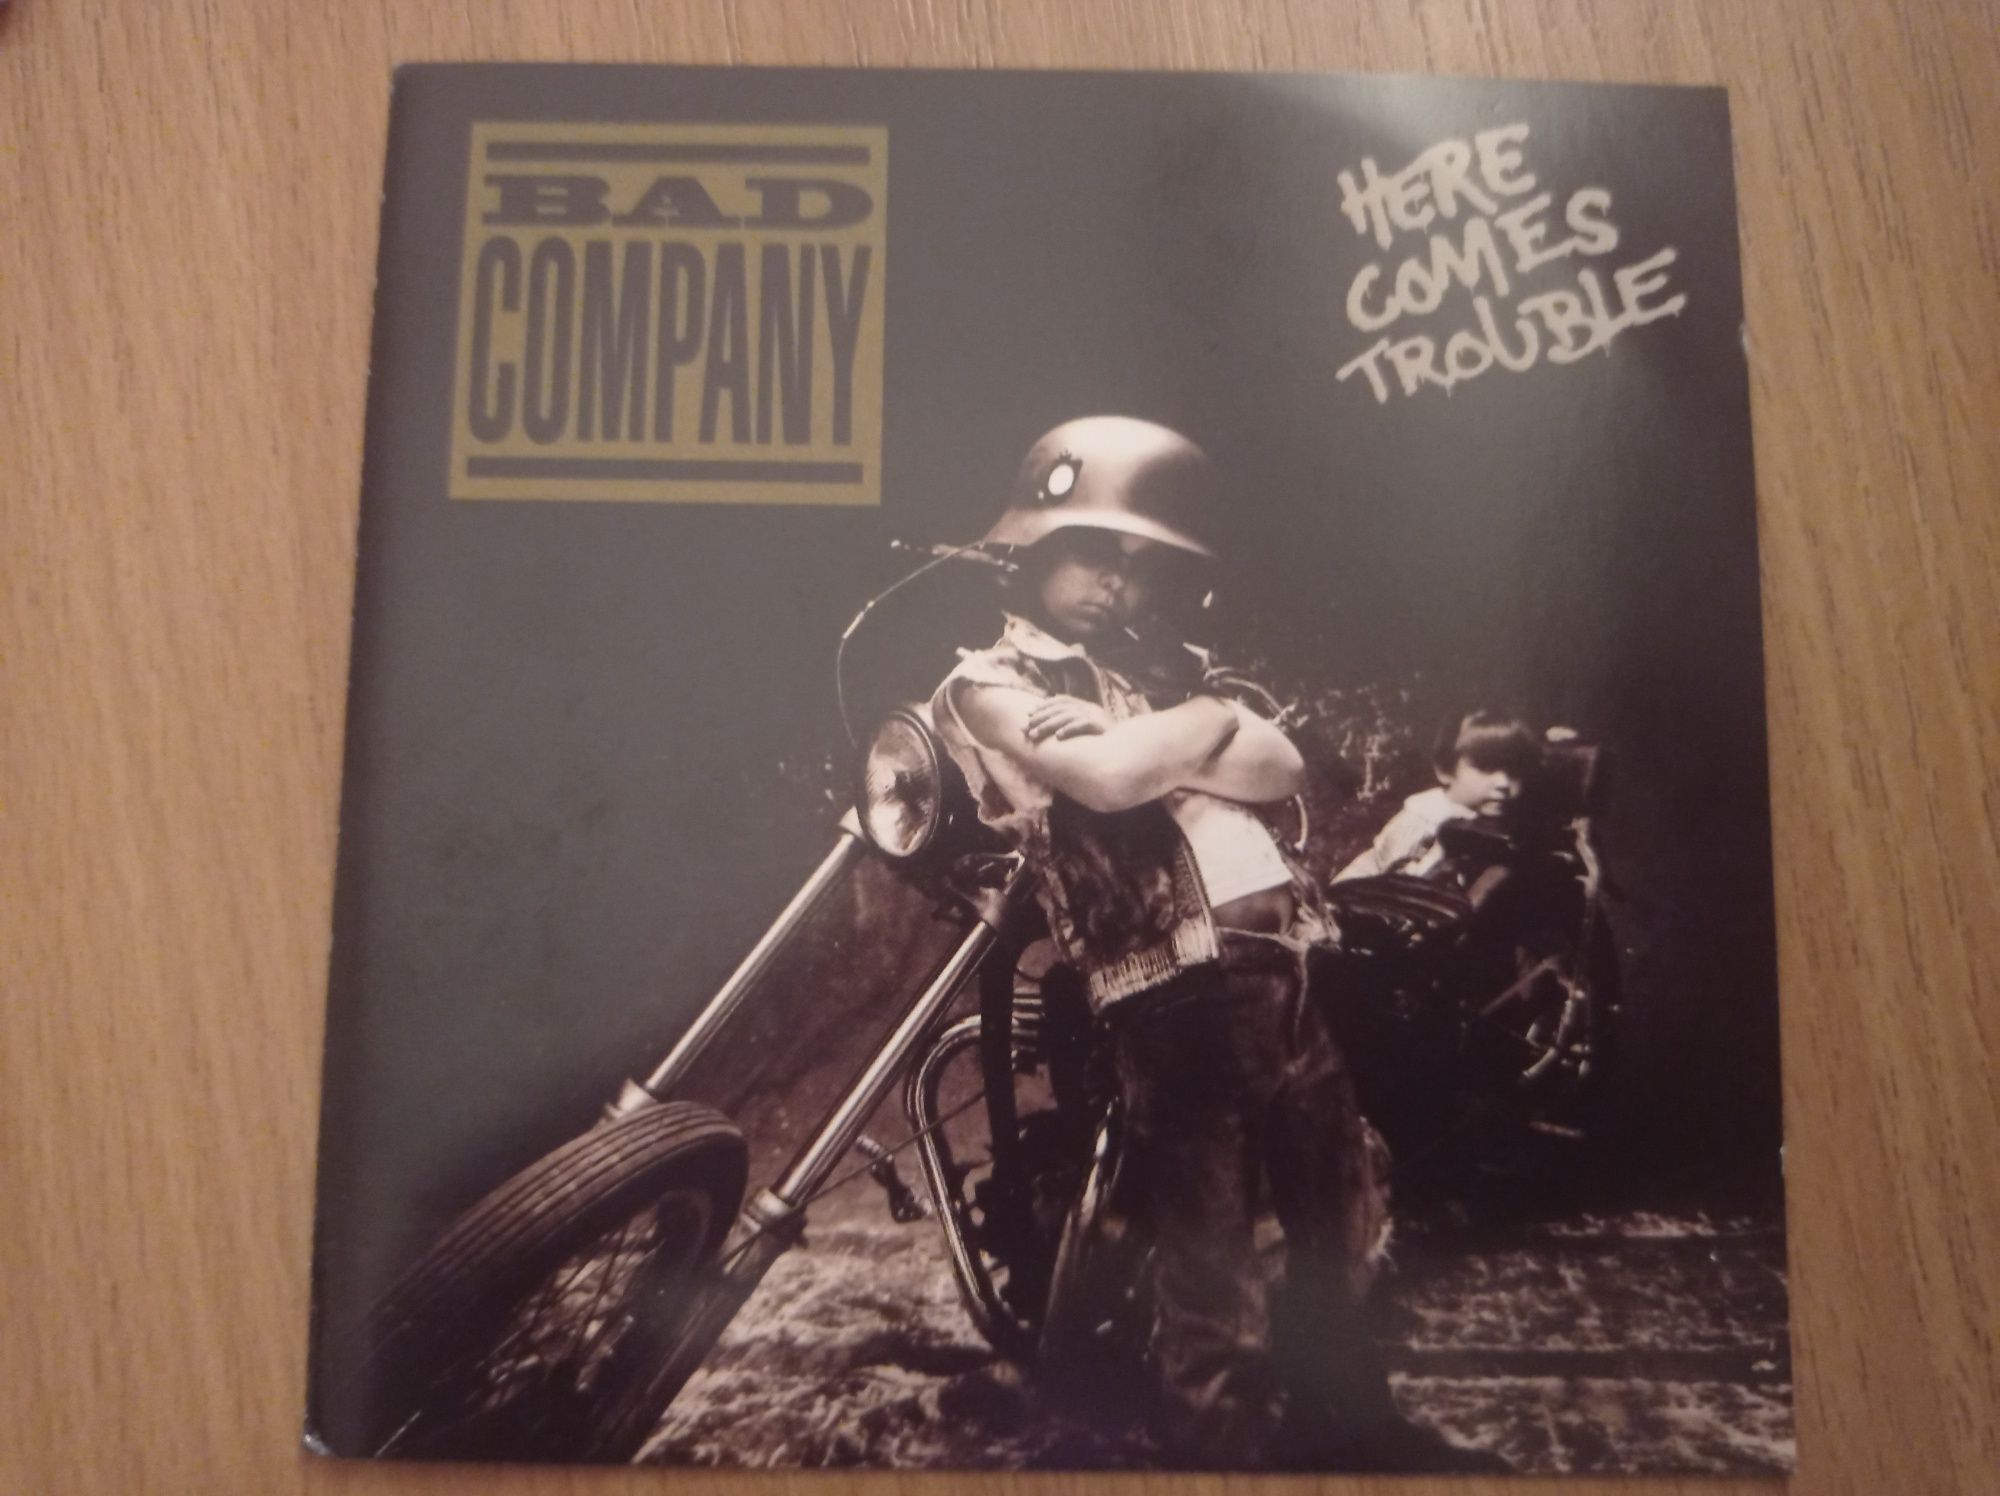 Bad Company - Here comes trouble